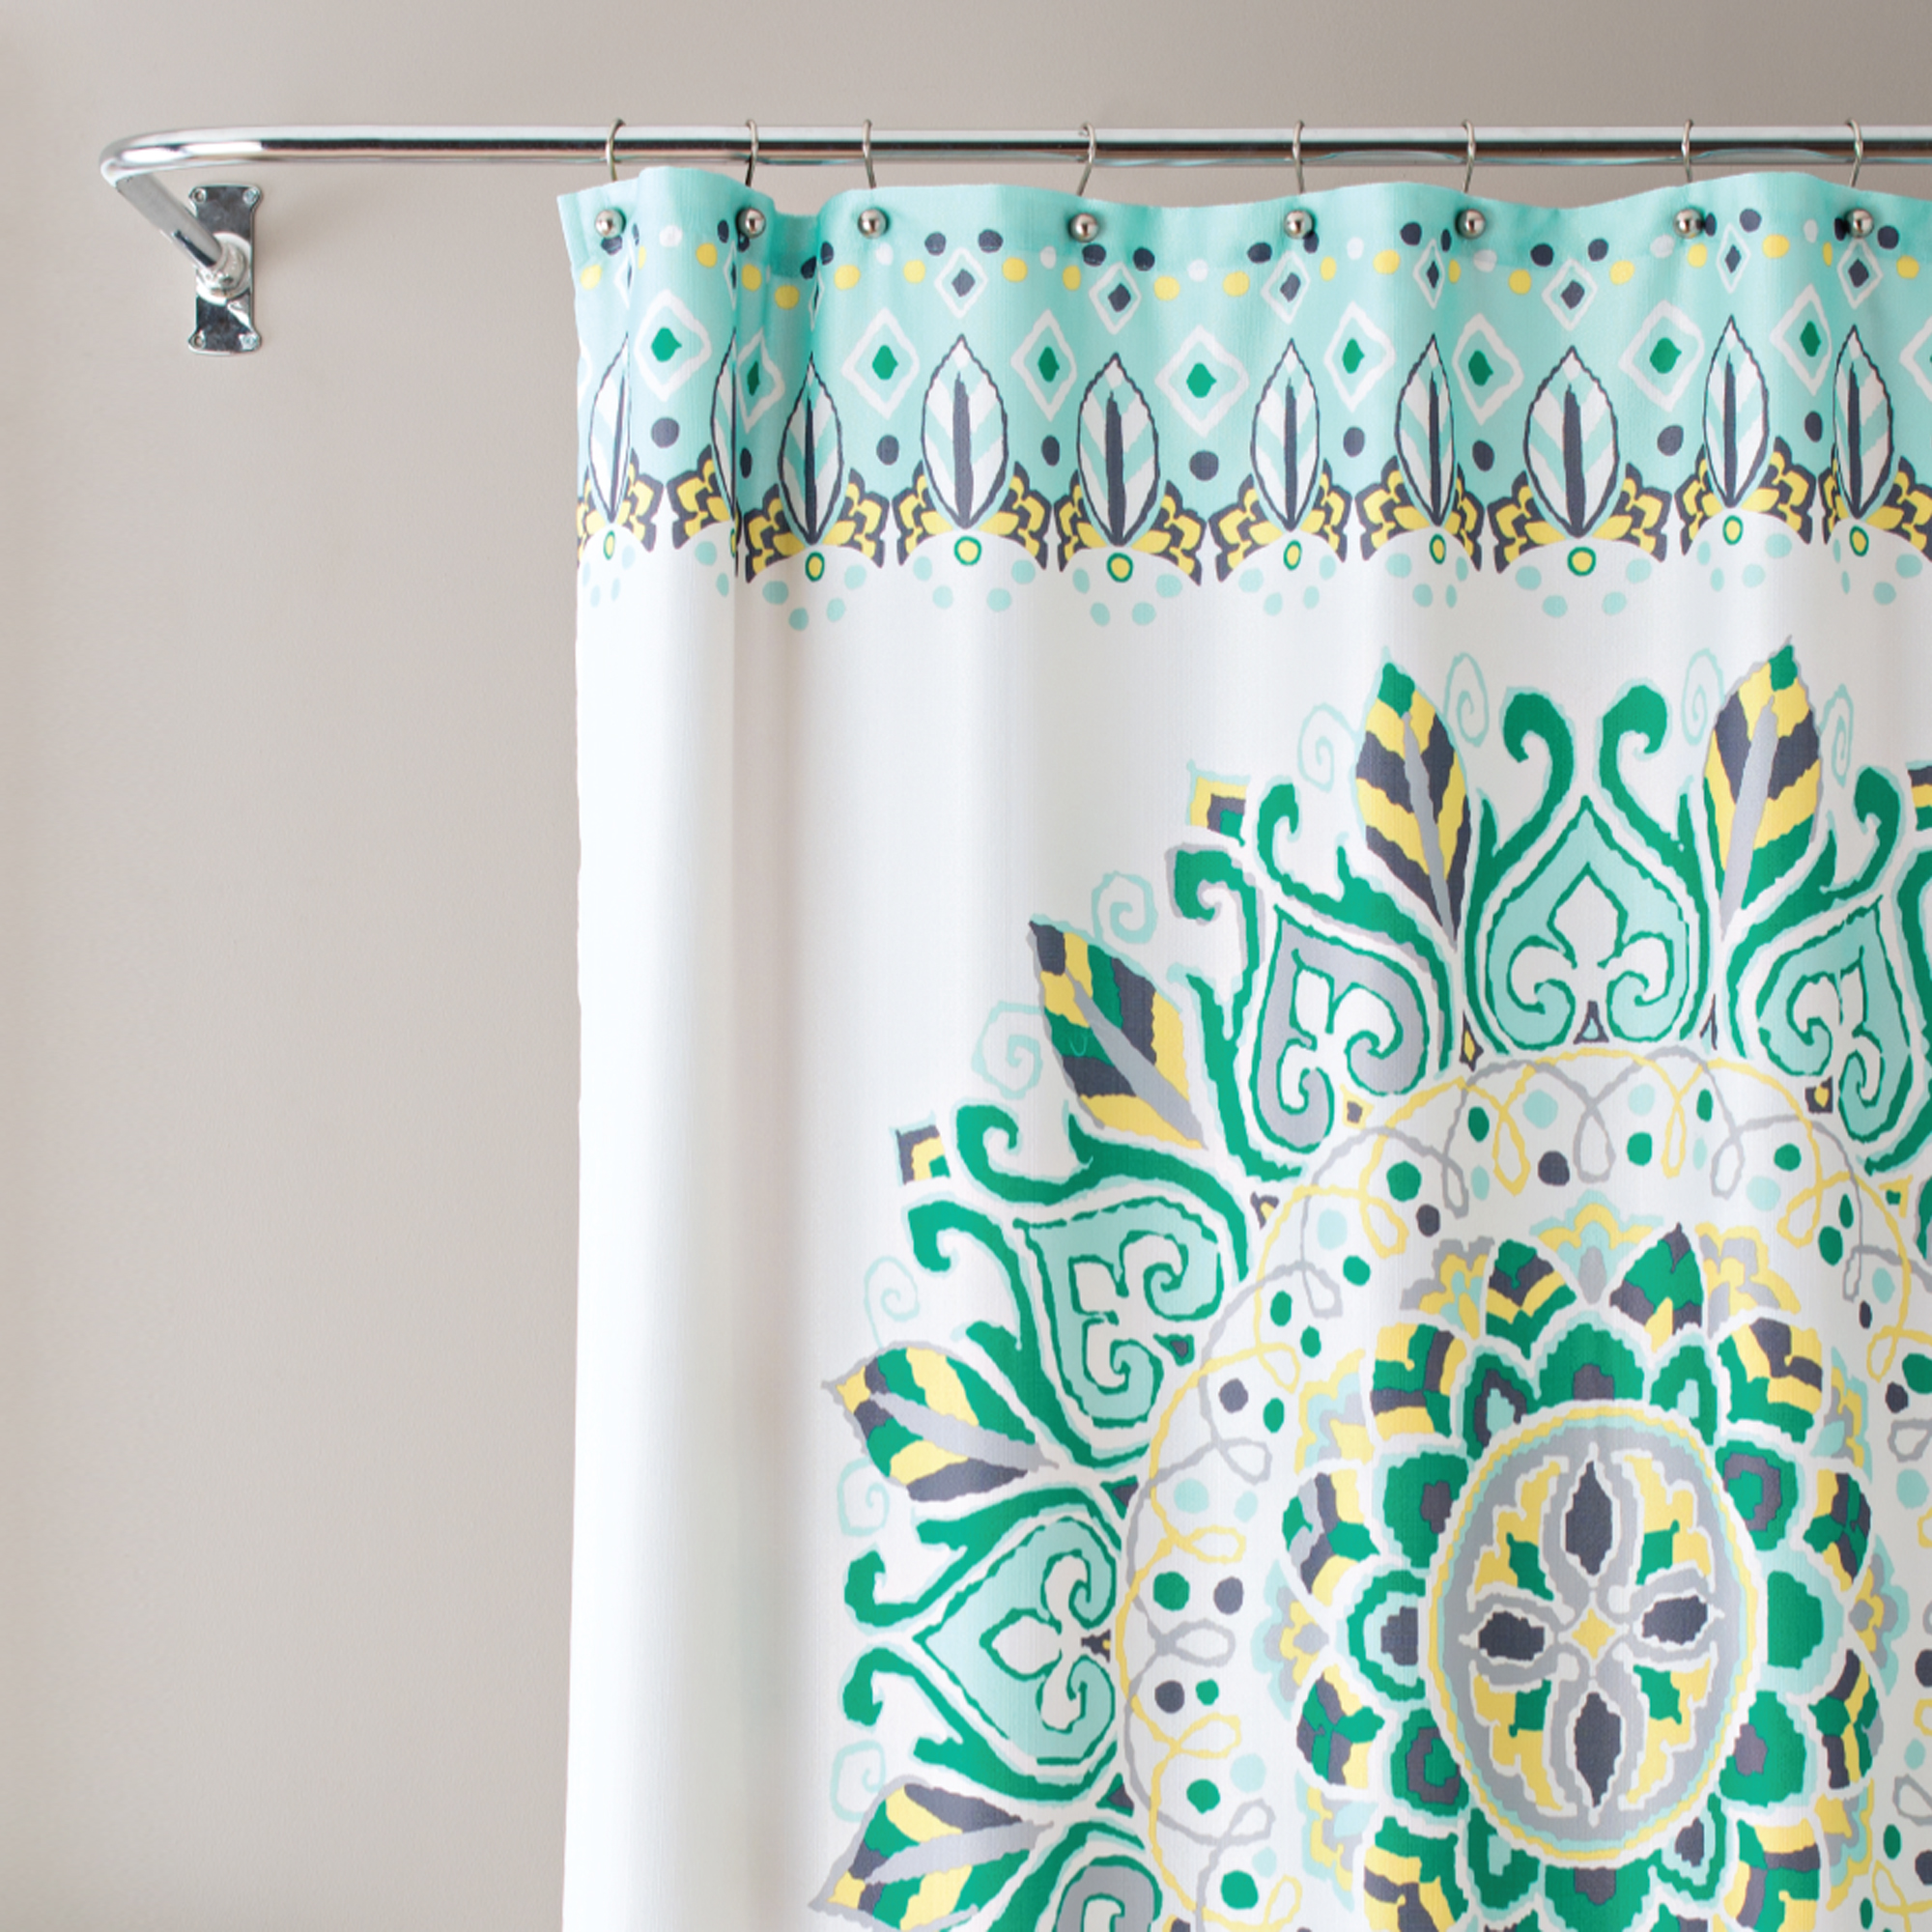 Multicolor Fabric Shower Curtain, 72" x 72", Better Homes & Gardens Medallion Pattern - image 3 of 5